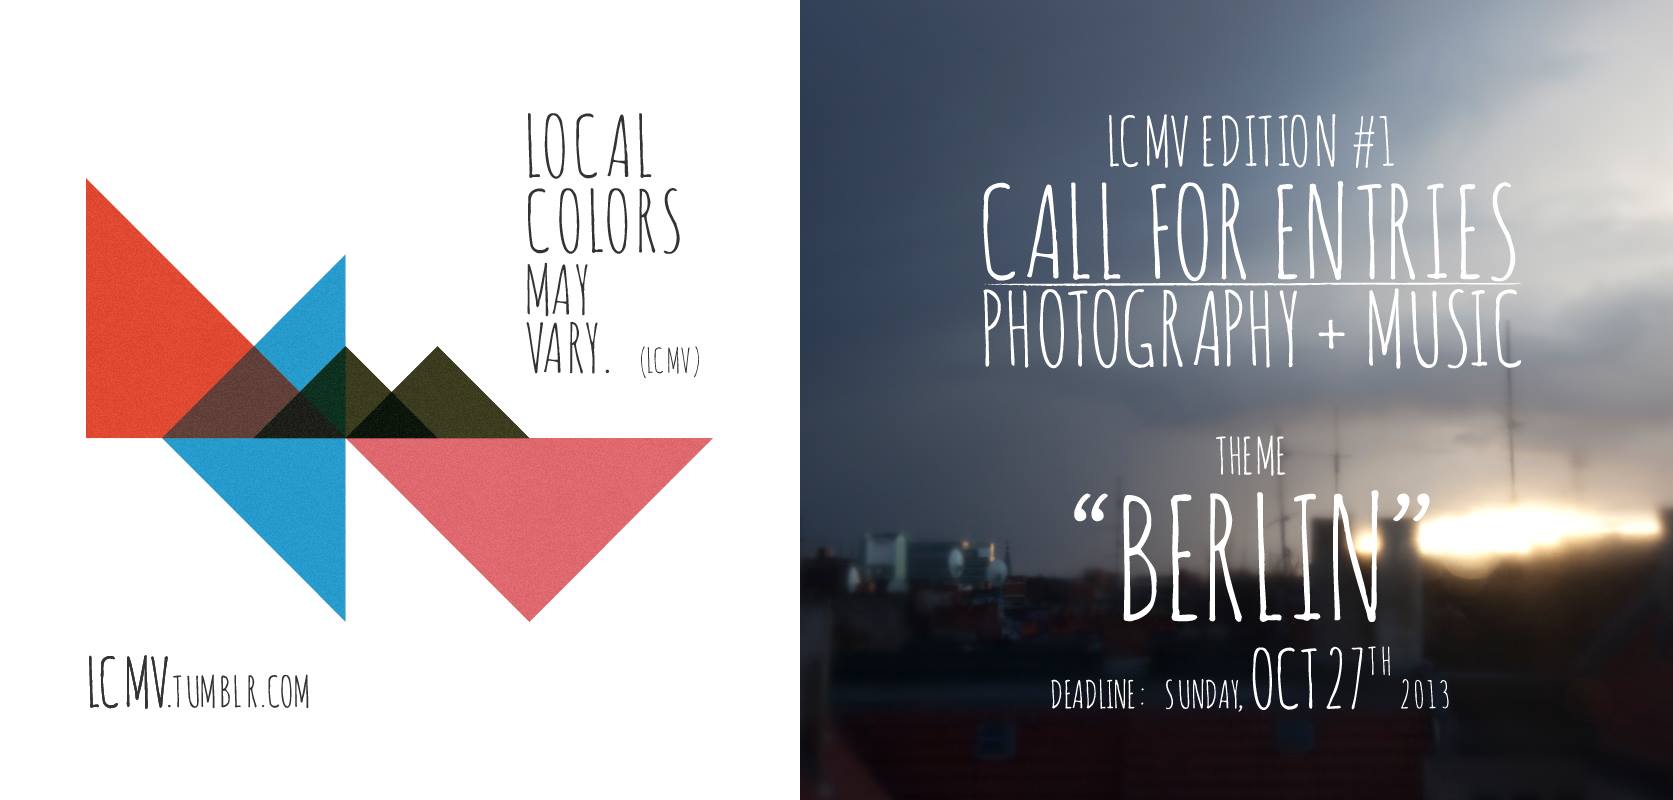 Local Colors May Vary #1 | open call